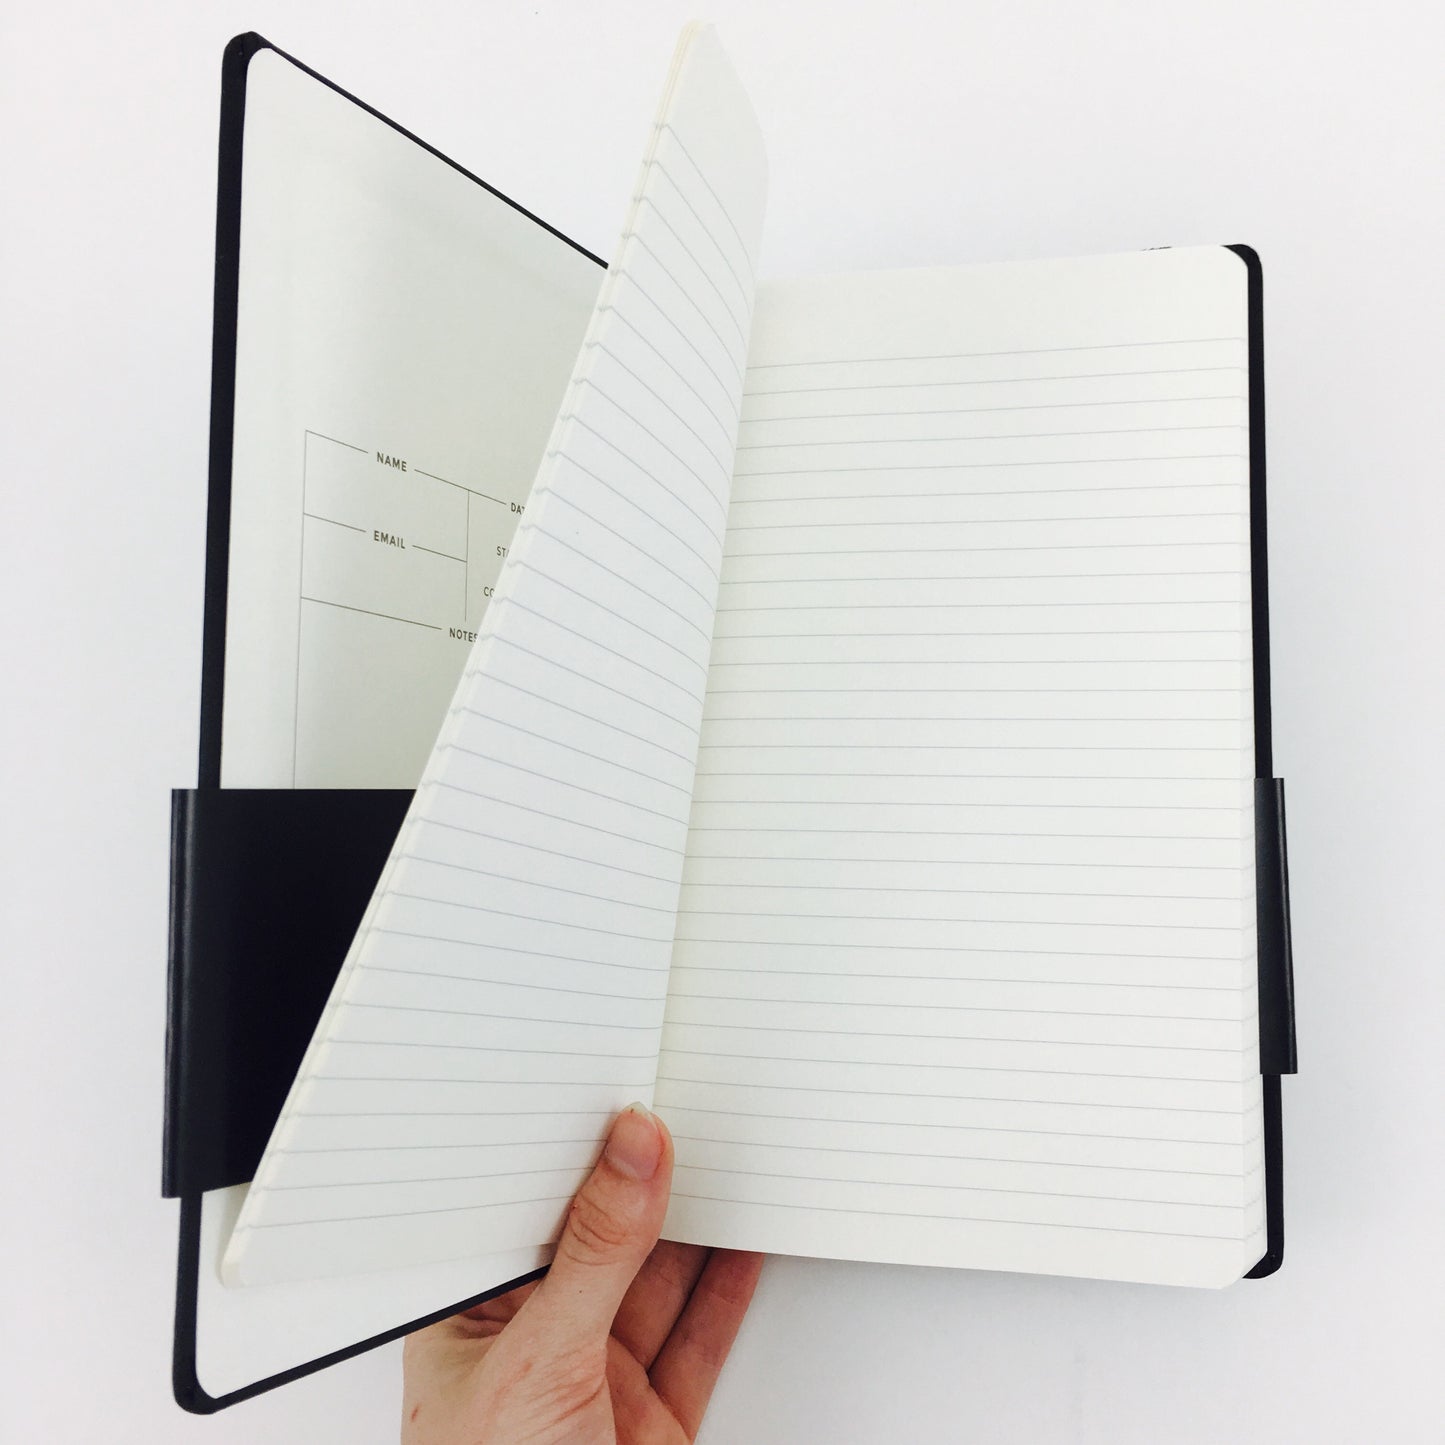 Blackwing Slate Travel Notebook with Original Pencil - Ruled by Blackwing - K. A. Artist Shop